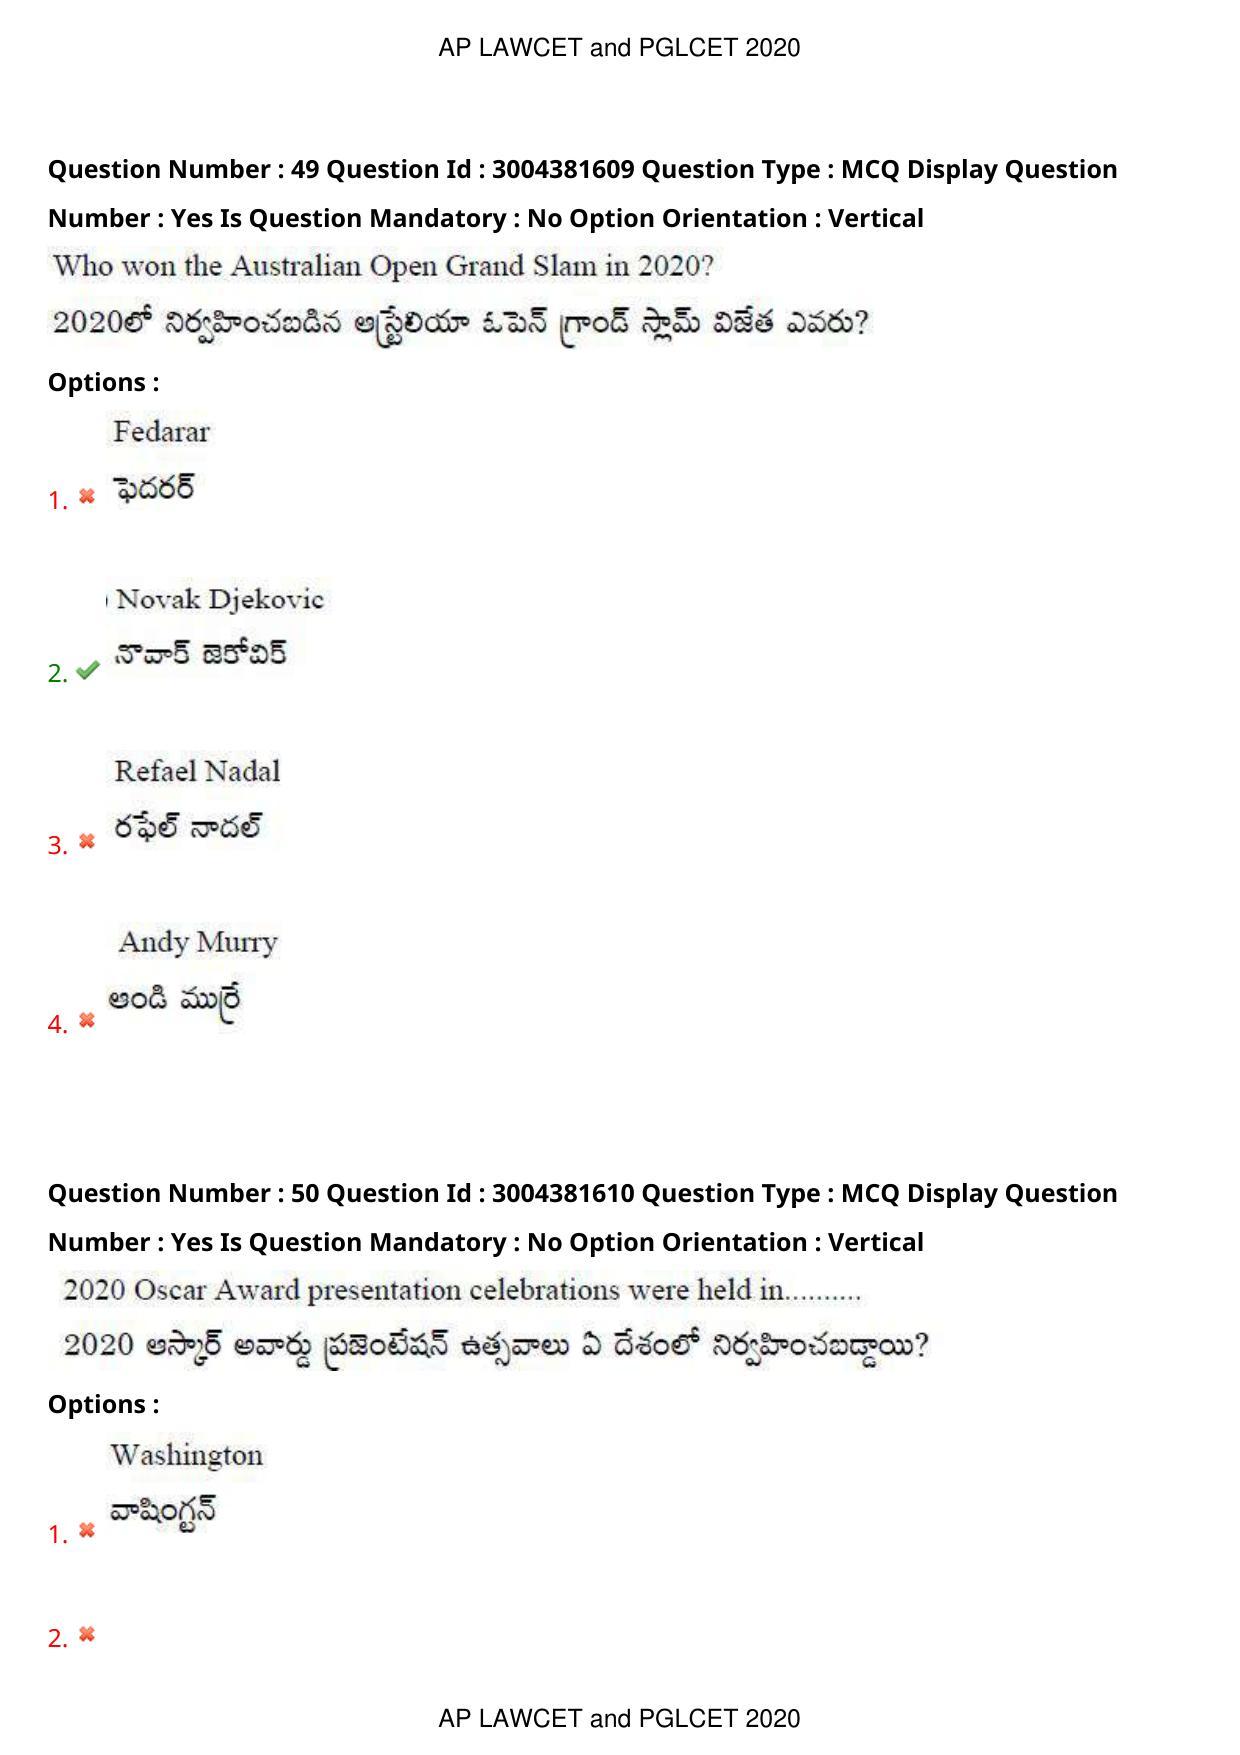 AP LAWCET 2020 - 5 Year LLB Question Paper With Keys - Page 32